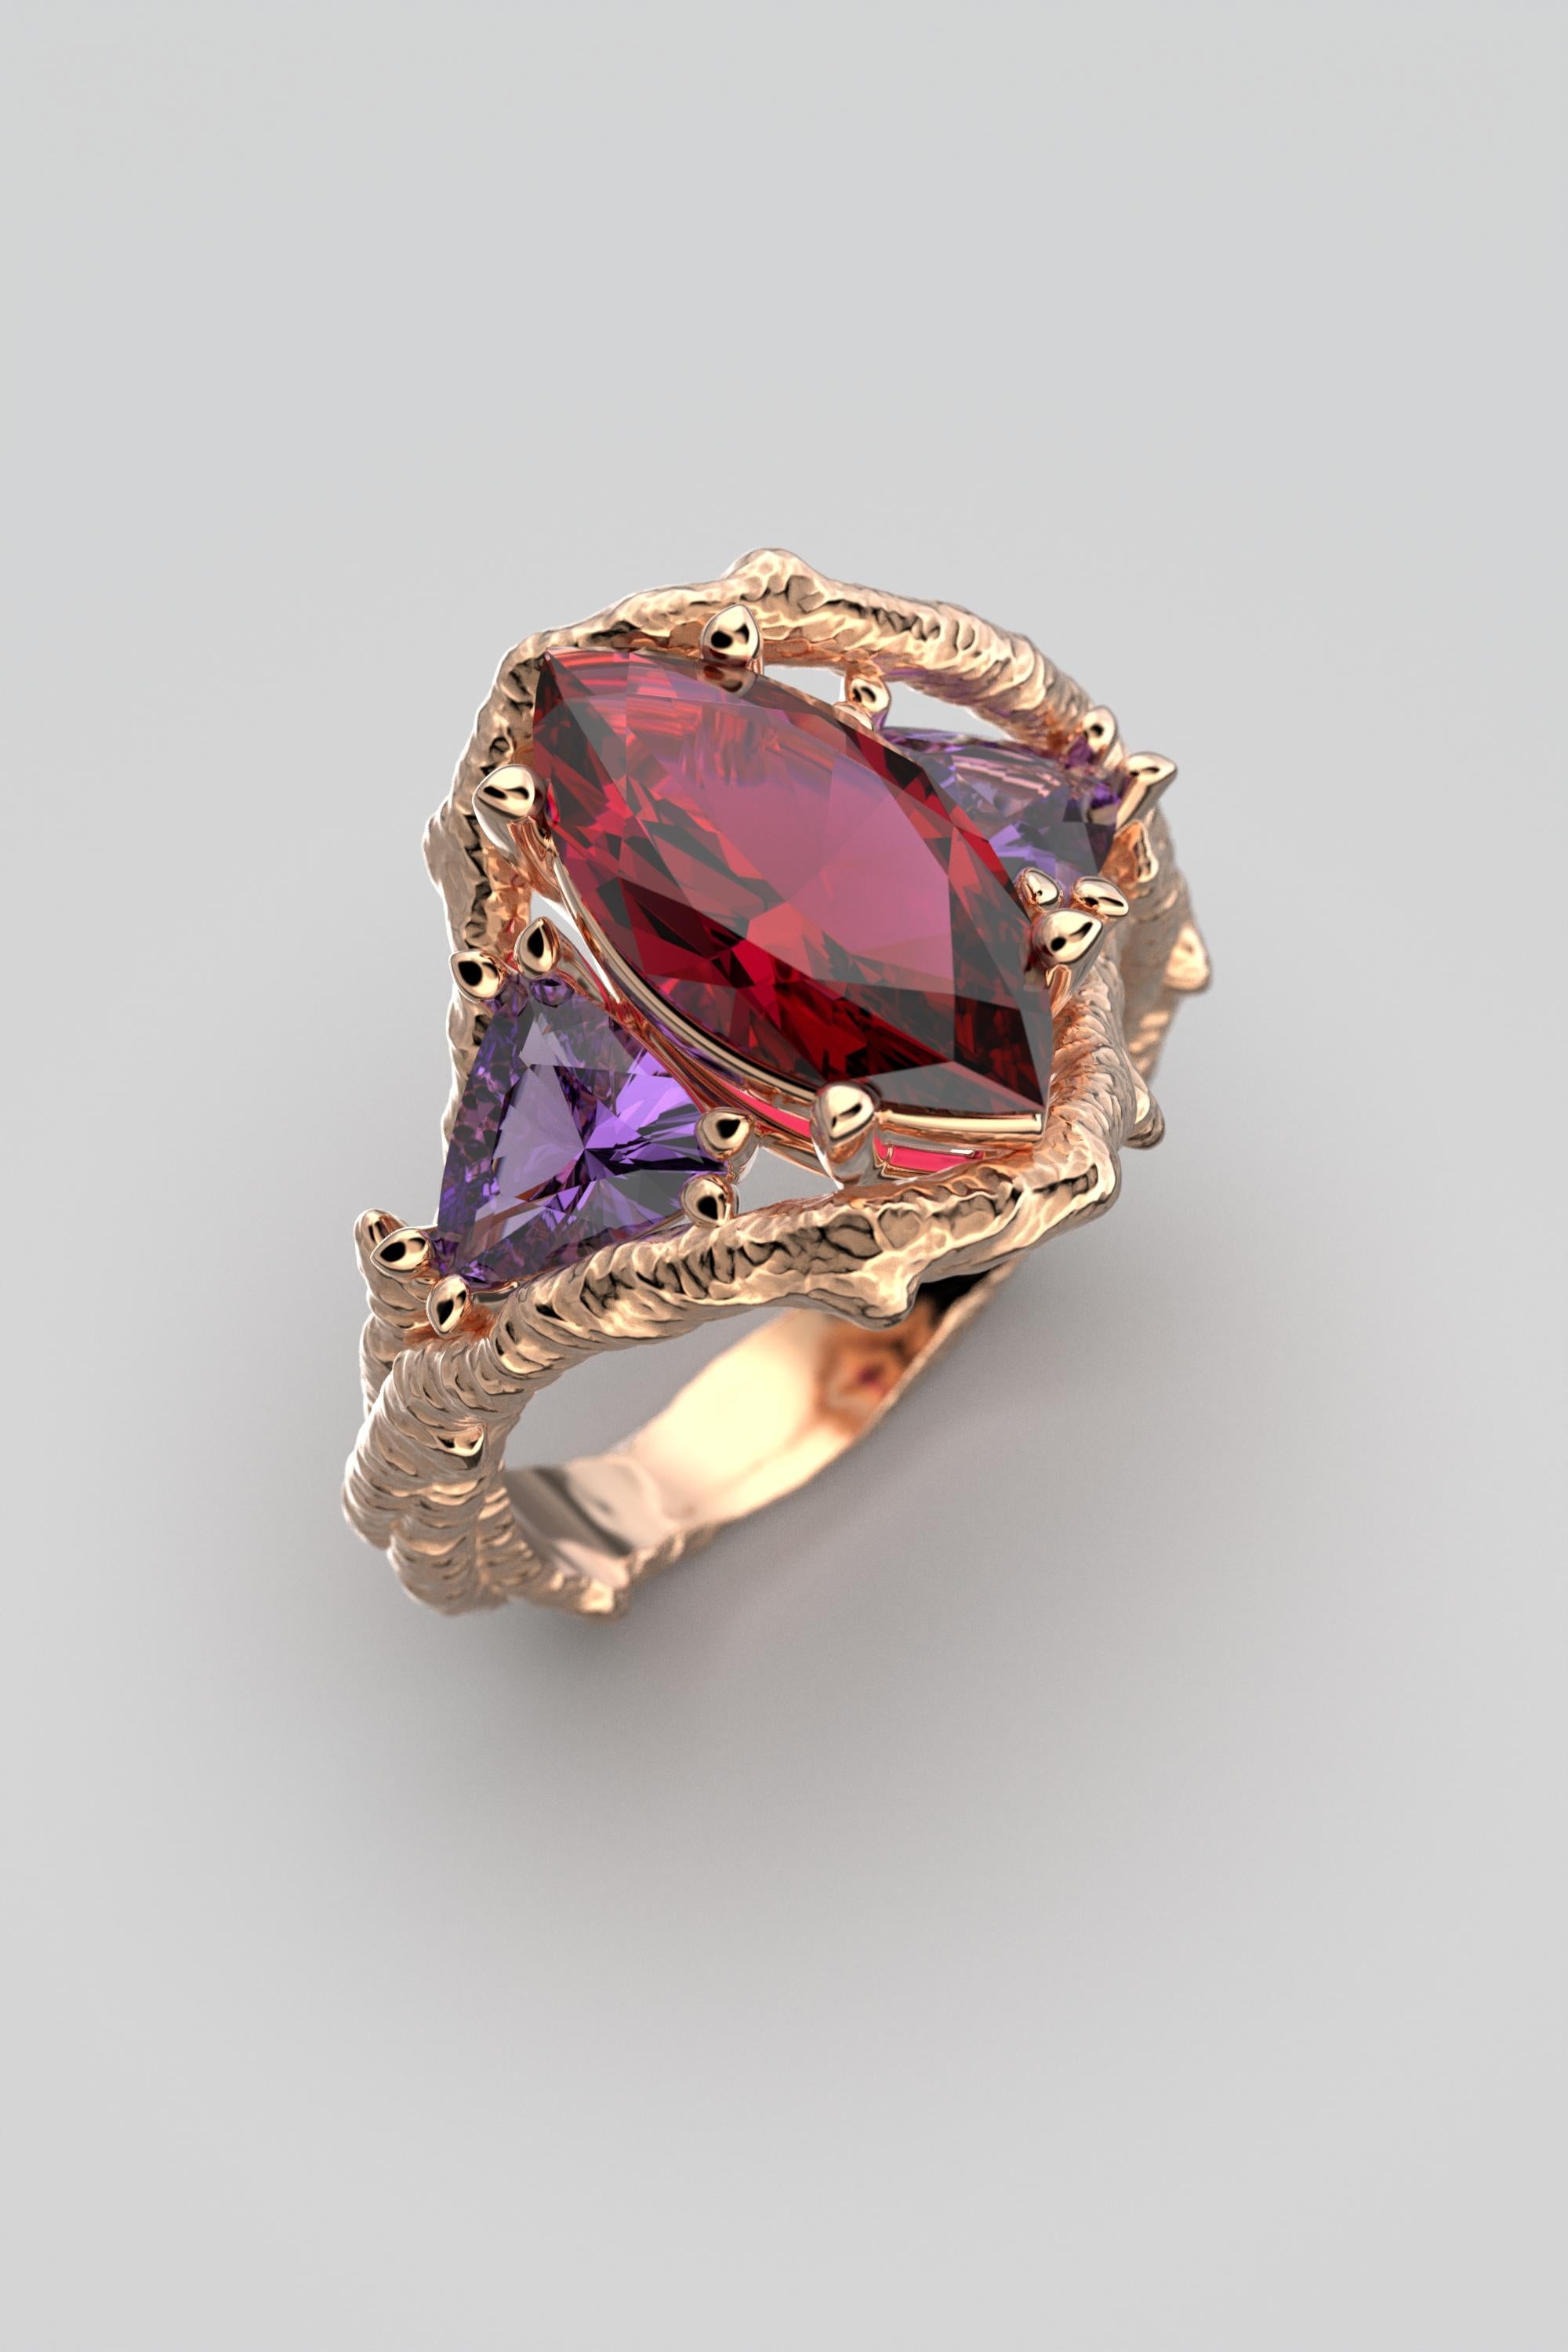 For Sale:  Rhodolite Garnet and Amethyst 14k Solid gold ring, Gold Ring Made In Italy 11